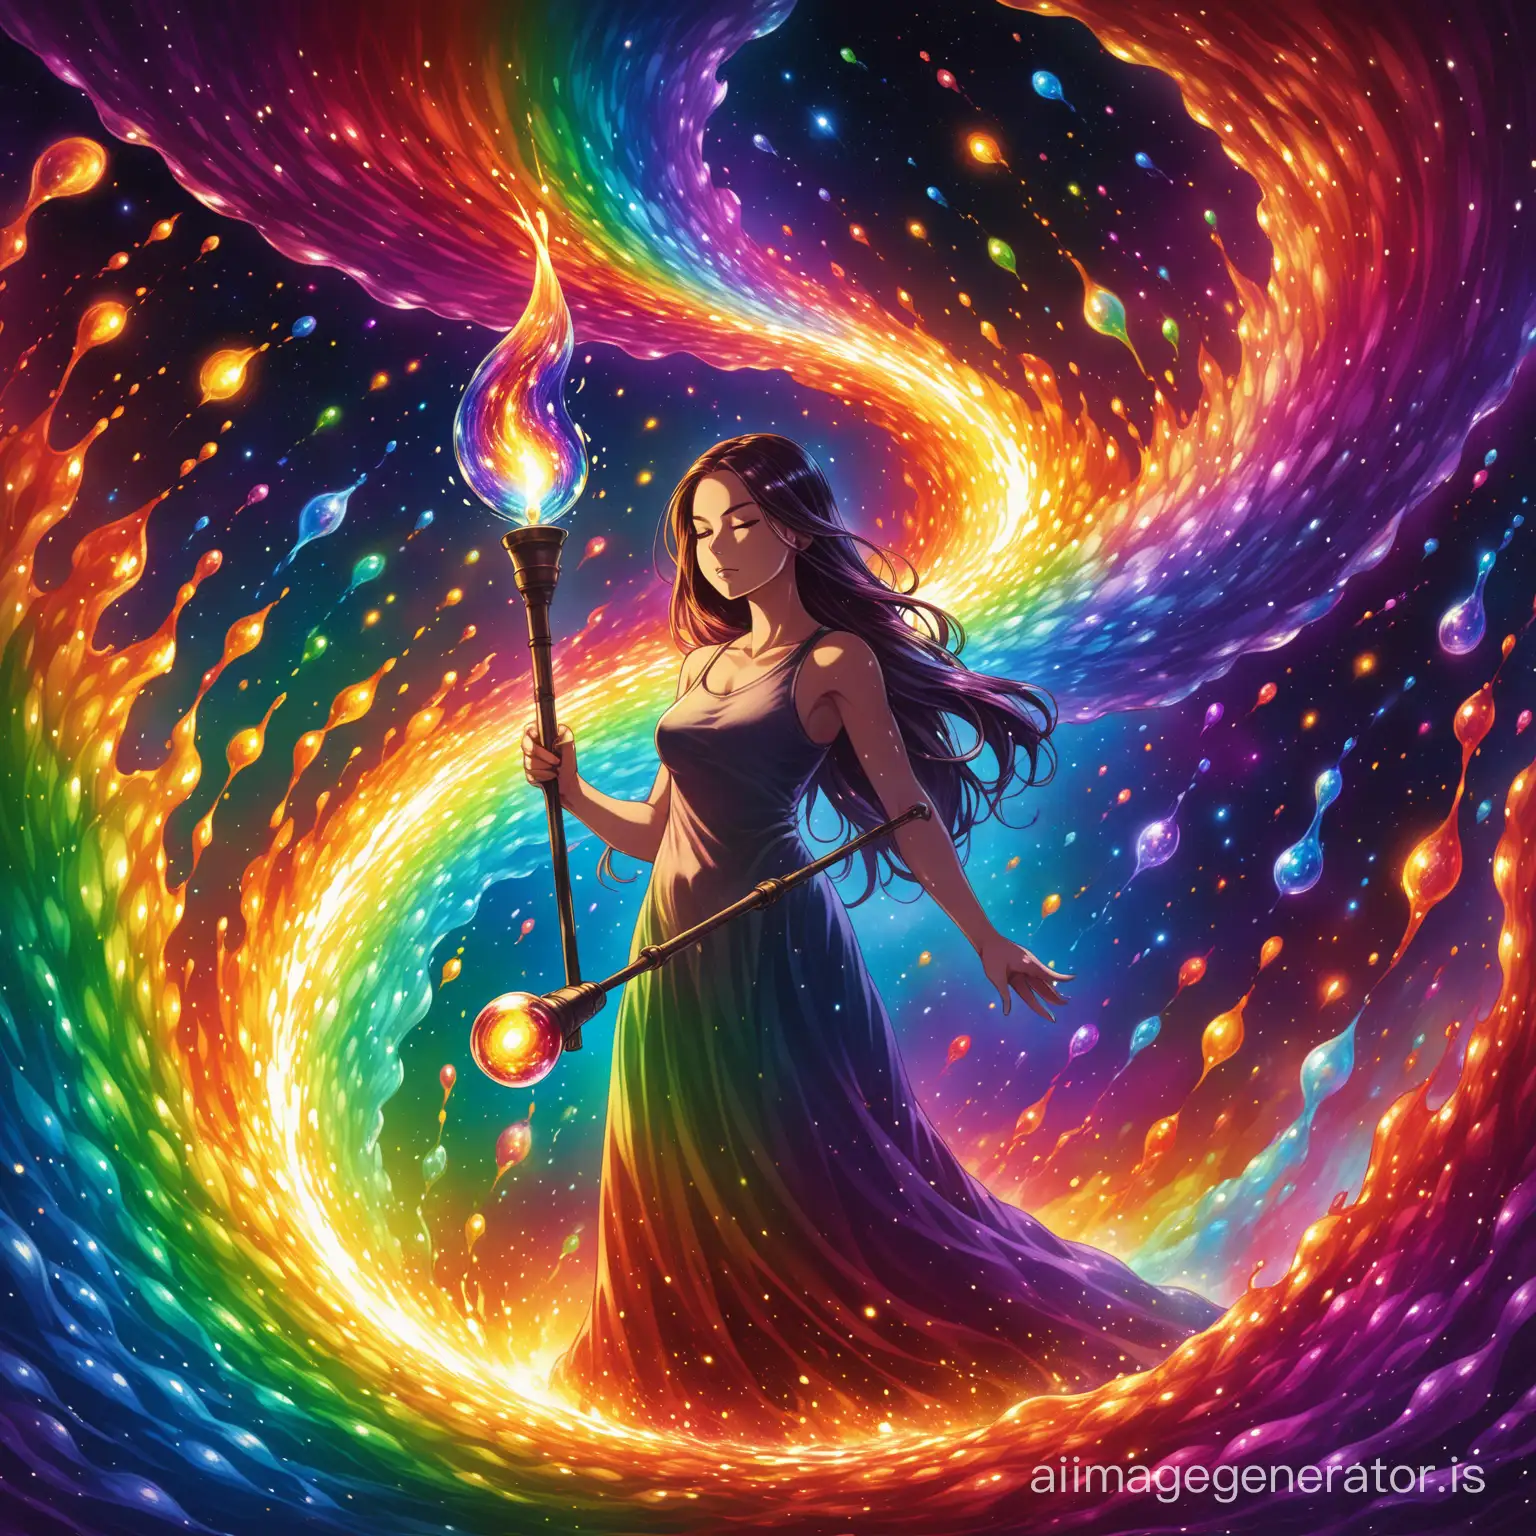 dark rainbow melting female at her torch glassblowing with cosmic background